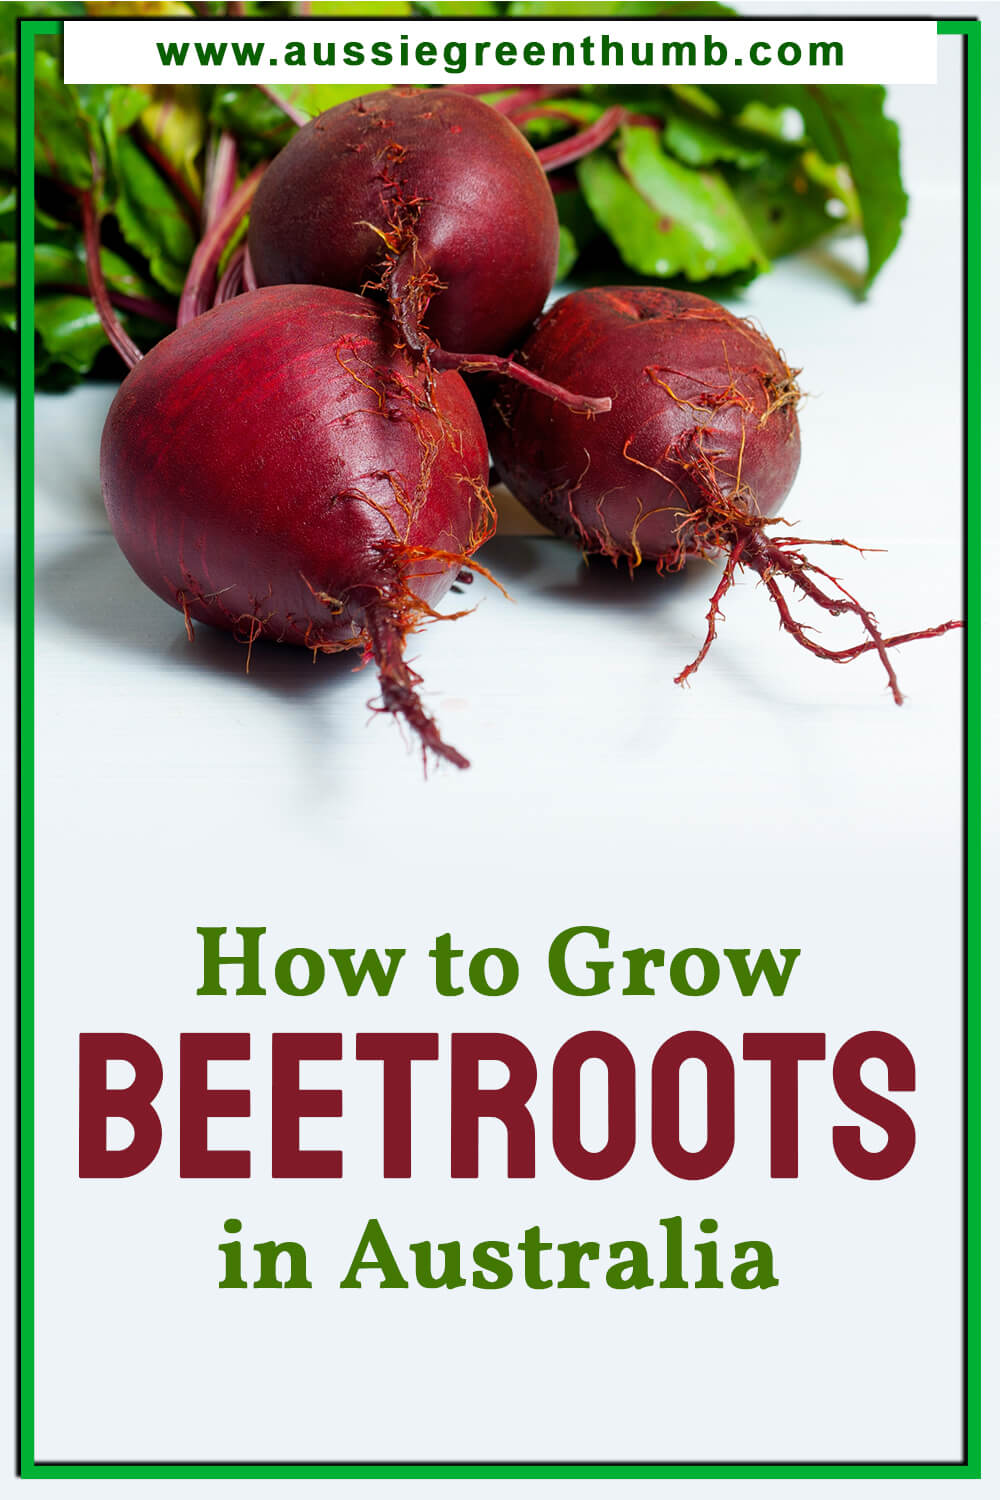 How to Grow Beetroots in Australia